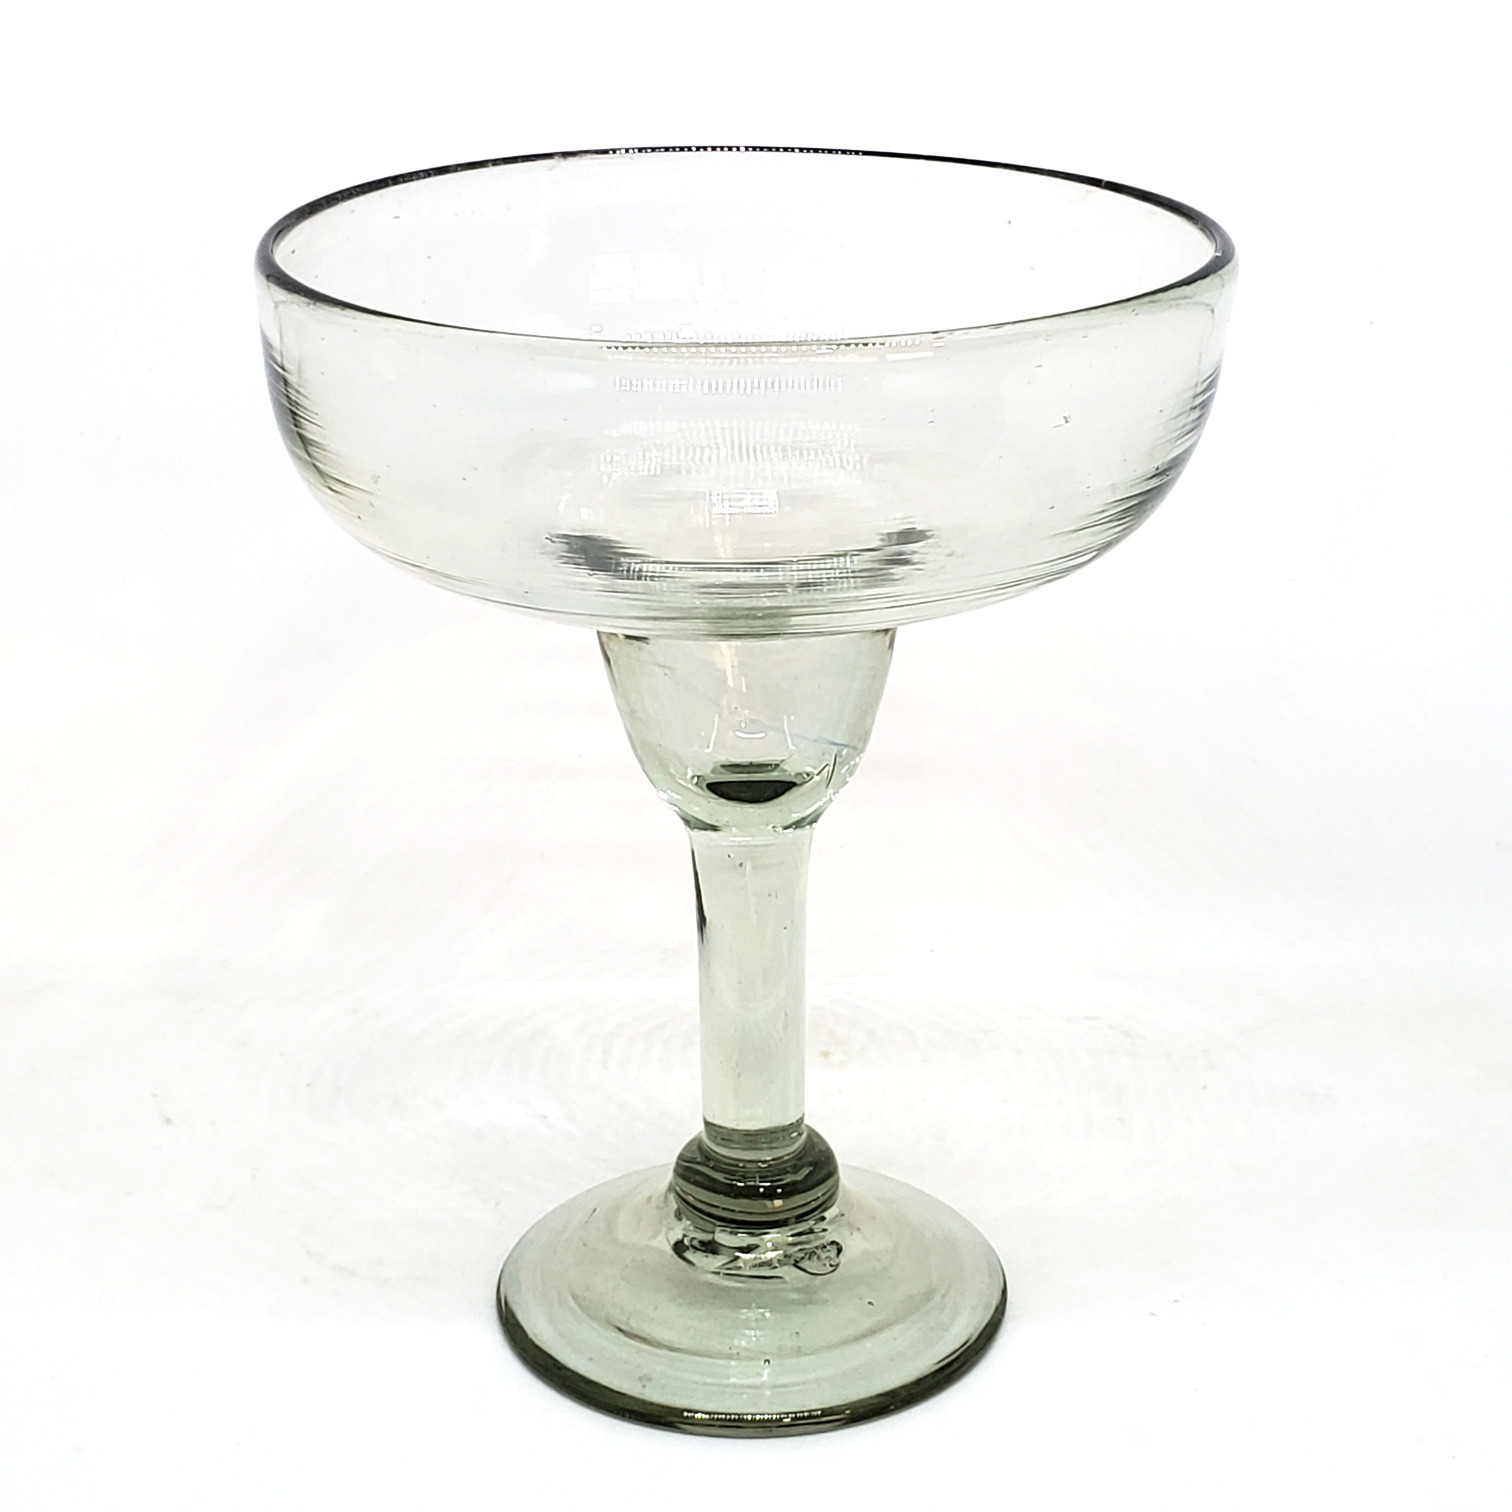 Sale Items / Clear Large 14 oz Margarita Glasses (set of 4) / For the margarita lover, these enjoyable large sized margarita glasses are individually hand blown and crafted.